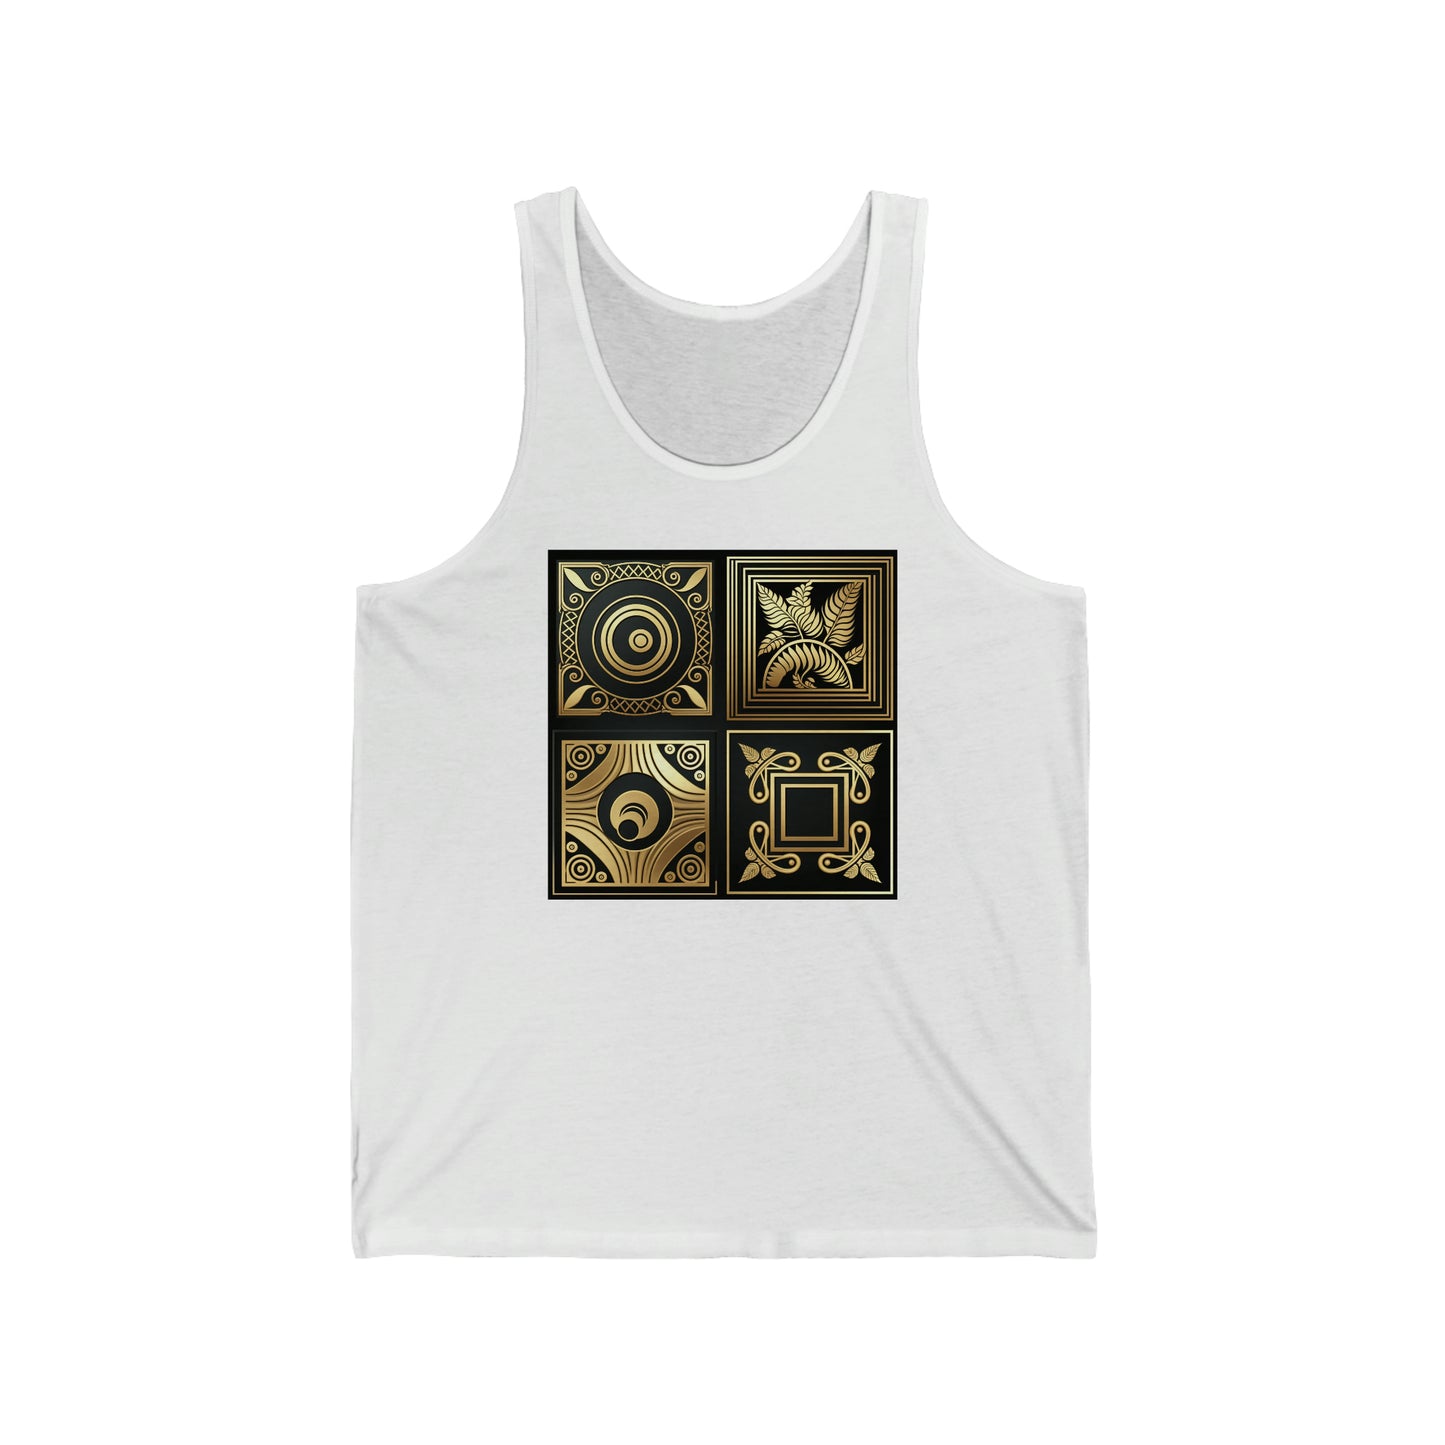 Black and Gold Jersey Tank